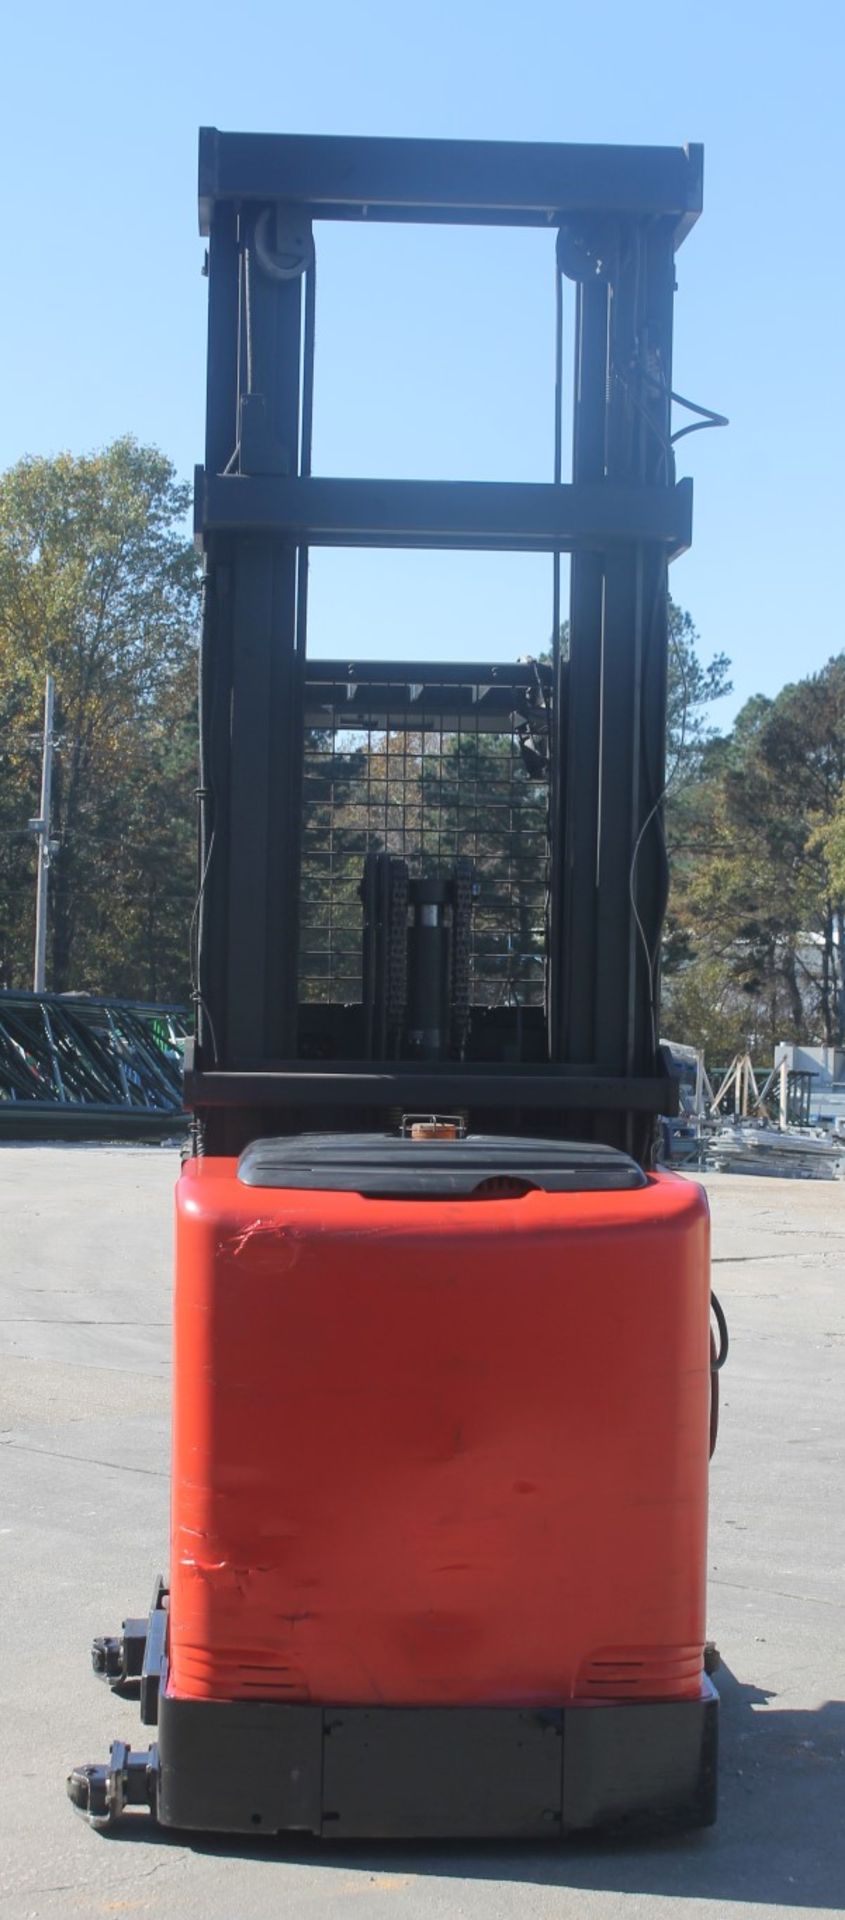 2008 RAYMOND 3000 LBS CAPACITY HIGH LEVEL ORDER PICKER WITH 2015 BATTERY (WATCH VIDEO) - Image 7 of 9